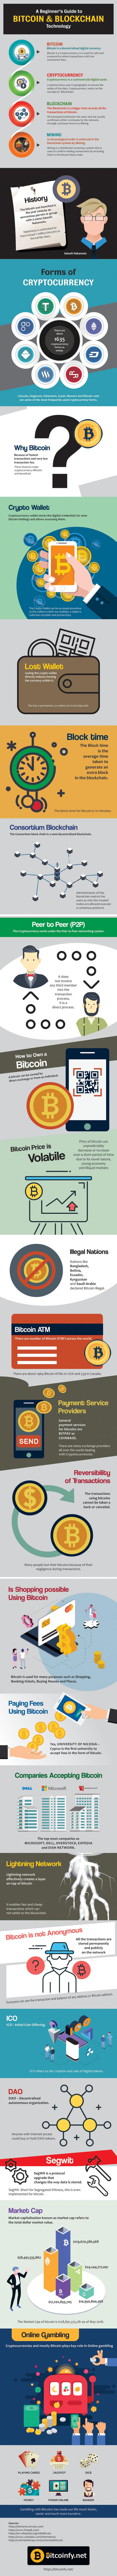 What WIll Happen When All Bitcoins Are Mined?